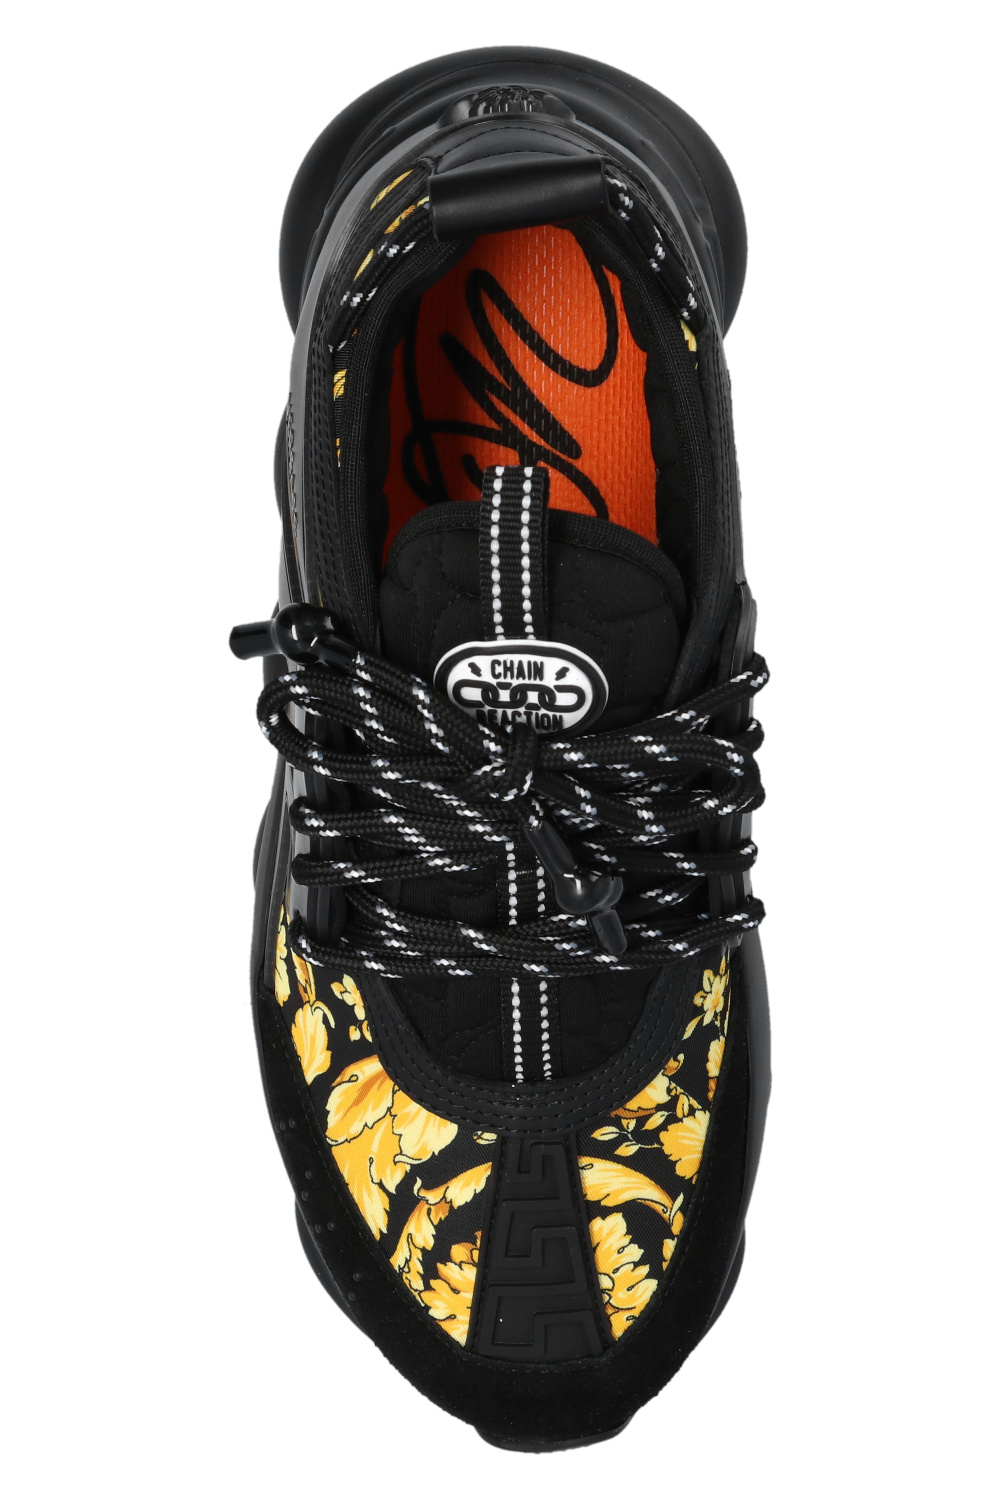 VERSACE - Chain Reaction Red White Blue & Yellow size 11 USA, 44 EUR 